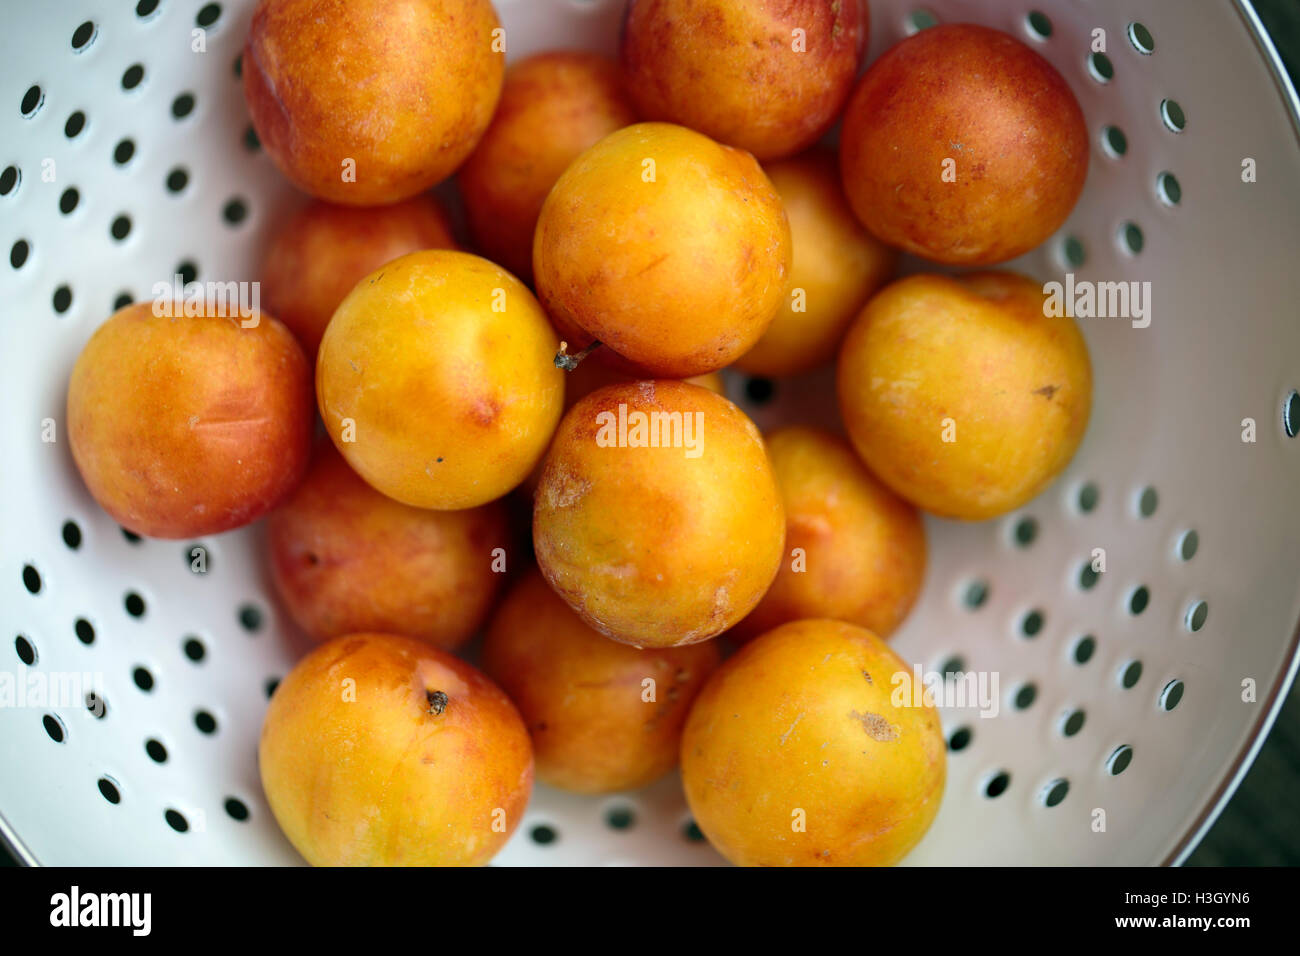 Rustic Still Life in Country Style with Ripe Yellow Plums Stock Photo